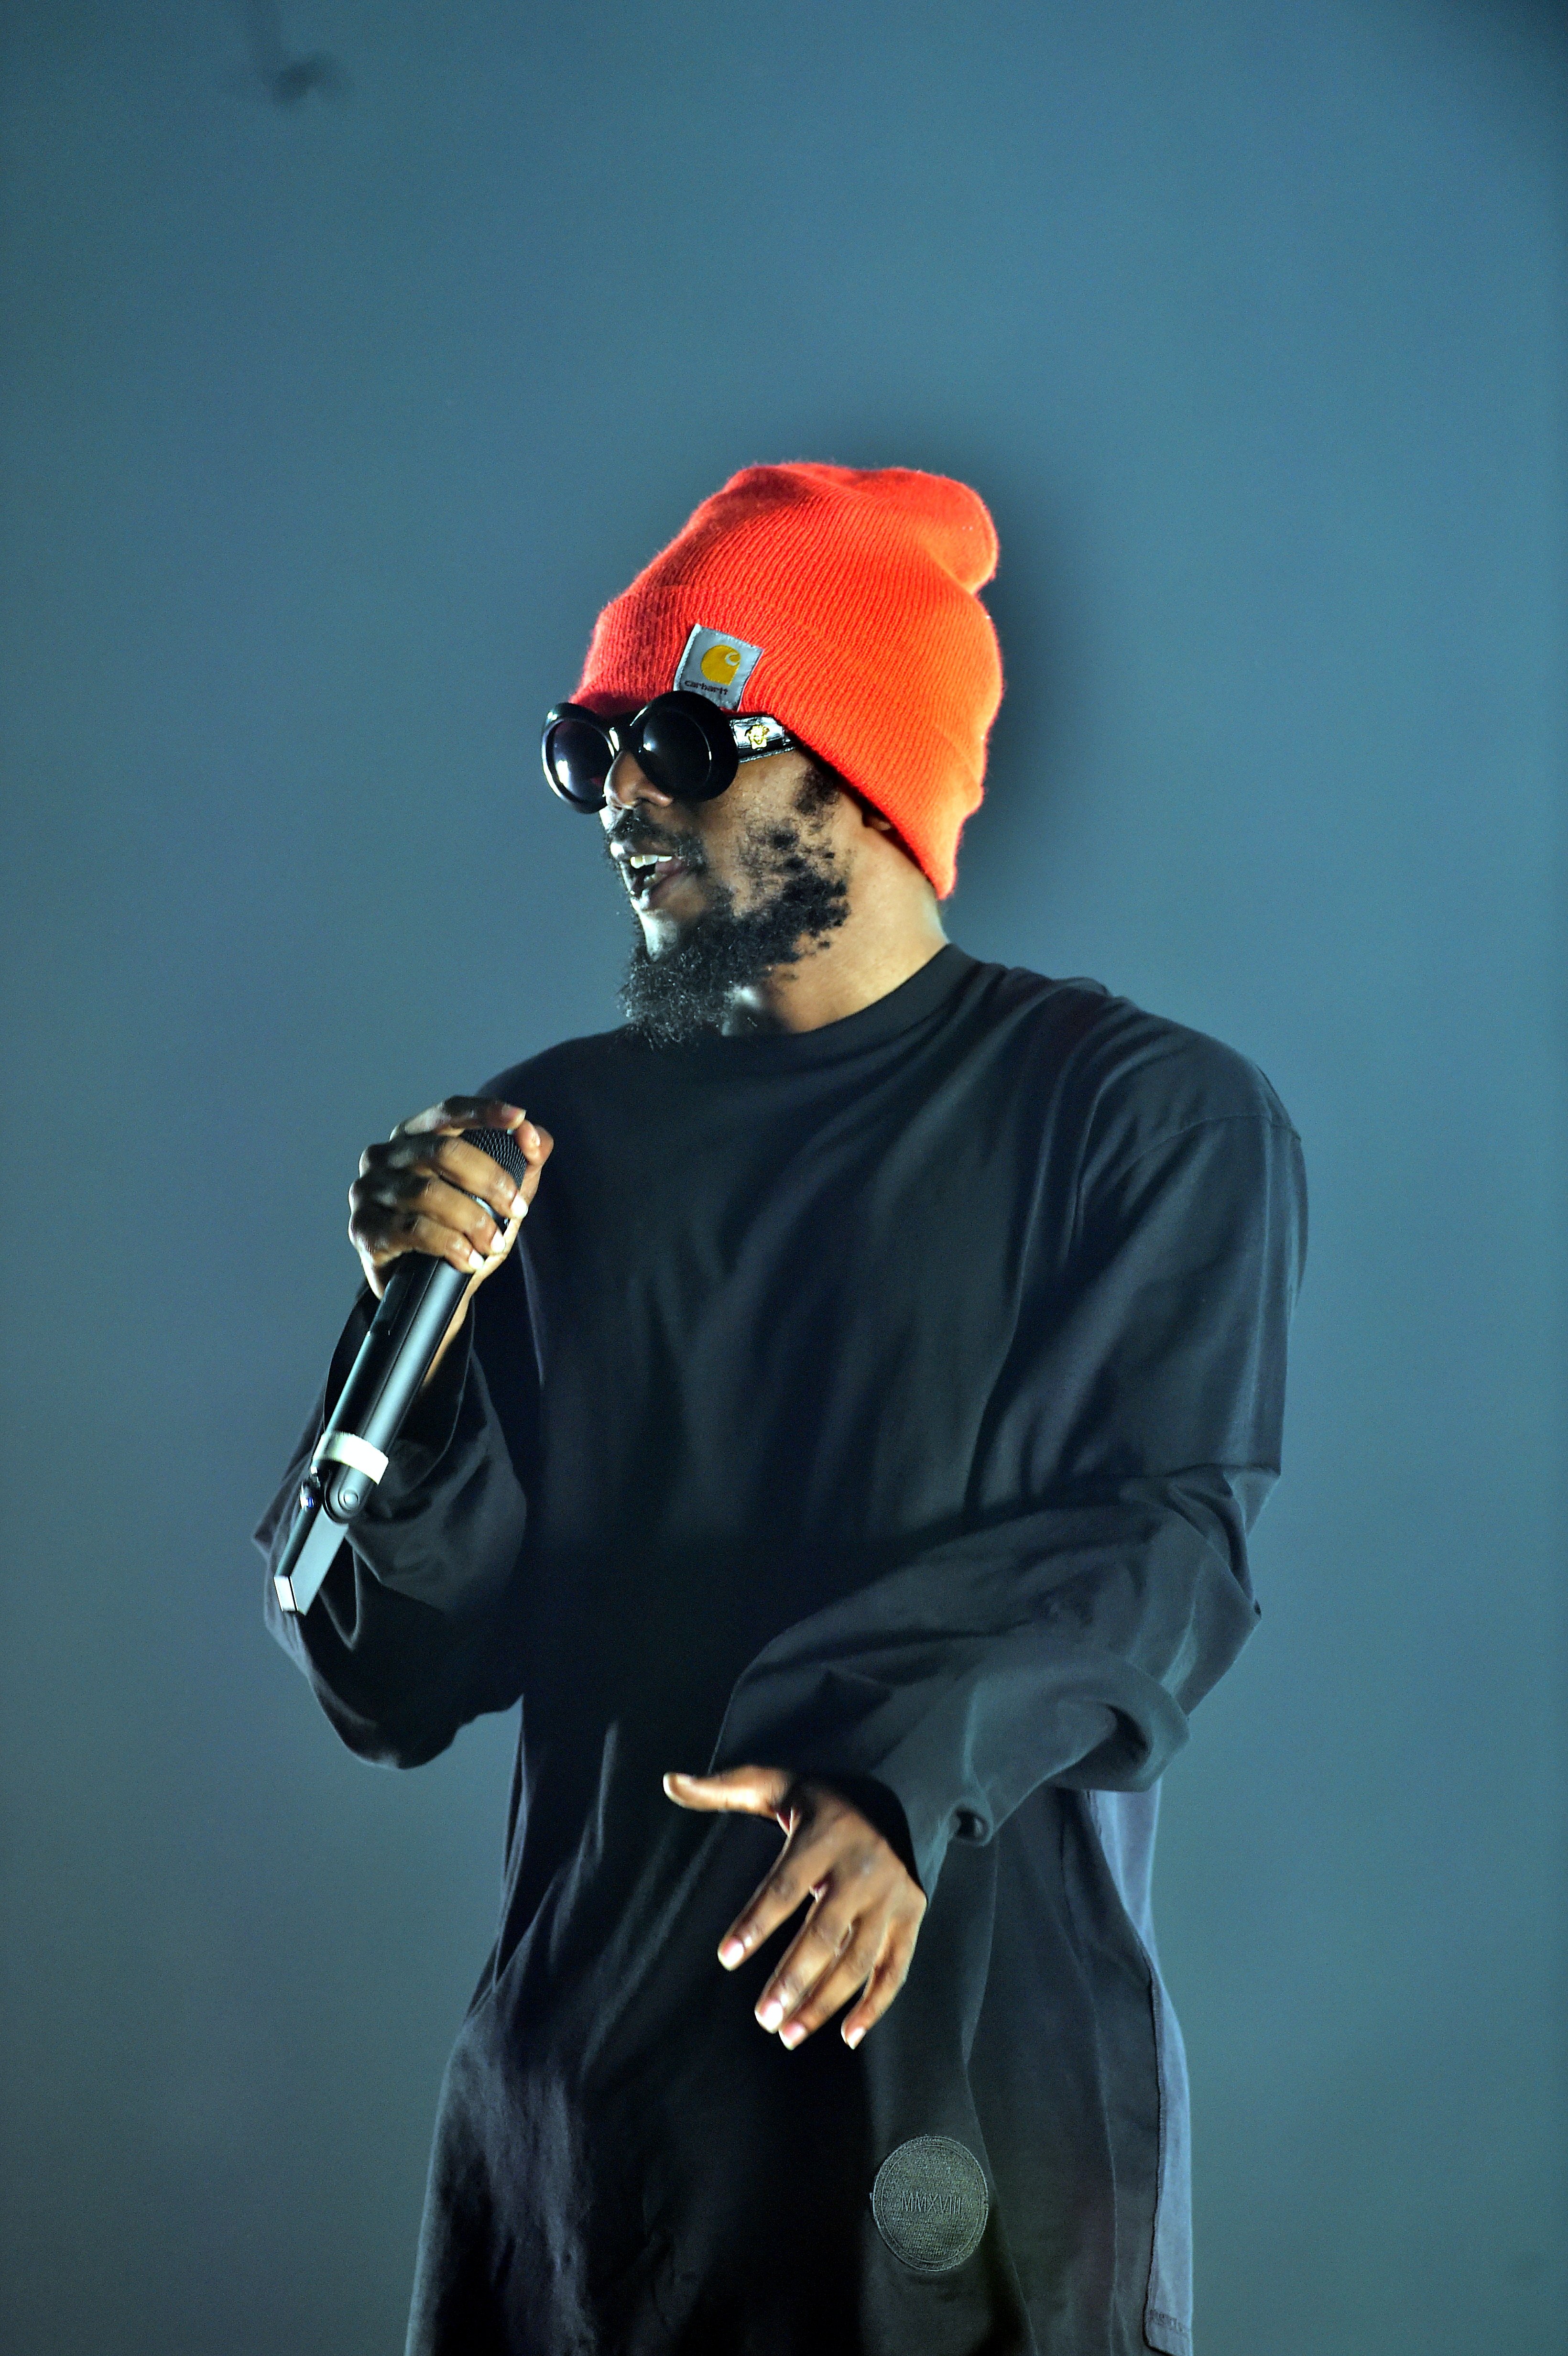 Kendrick Lamar performs at 2019 Tycoon Music Festival at Cellairis Amphitheatre at Lakewood on June 8, 2019, in Atlanta, Georgia. | Source: Getty Images